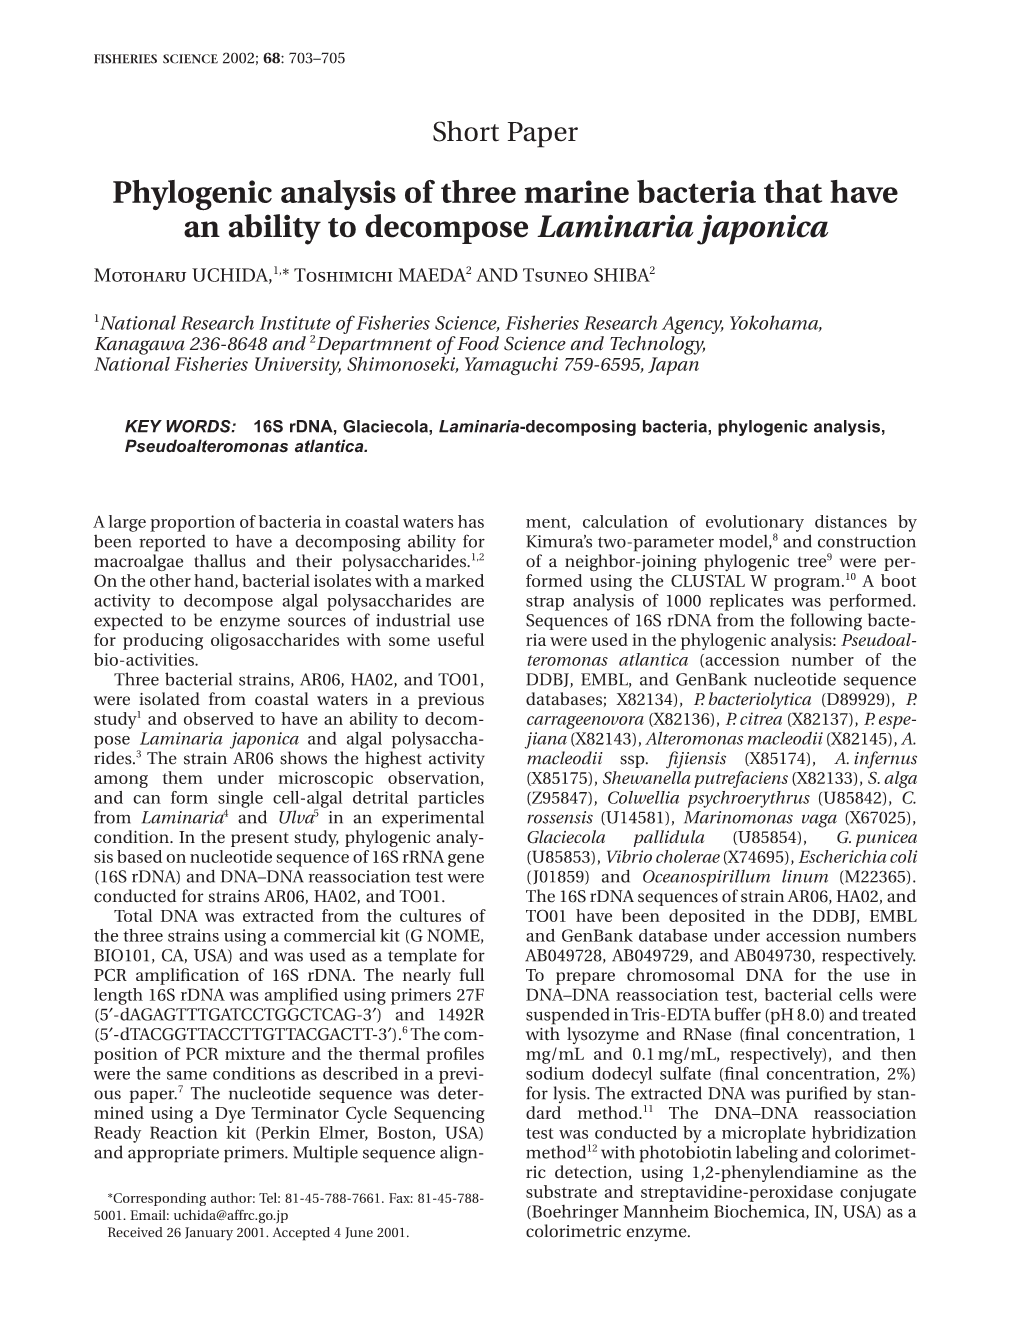 Phylogenic Analysis of Three Marine Bacteria That Have an Ability to Decompose Laminaria Japonica